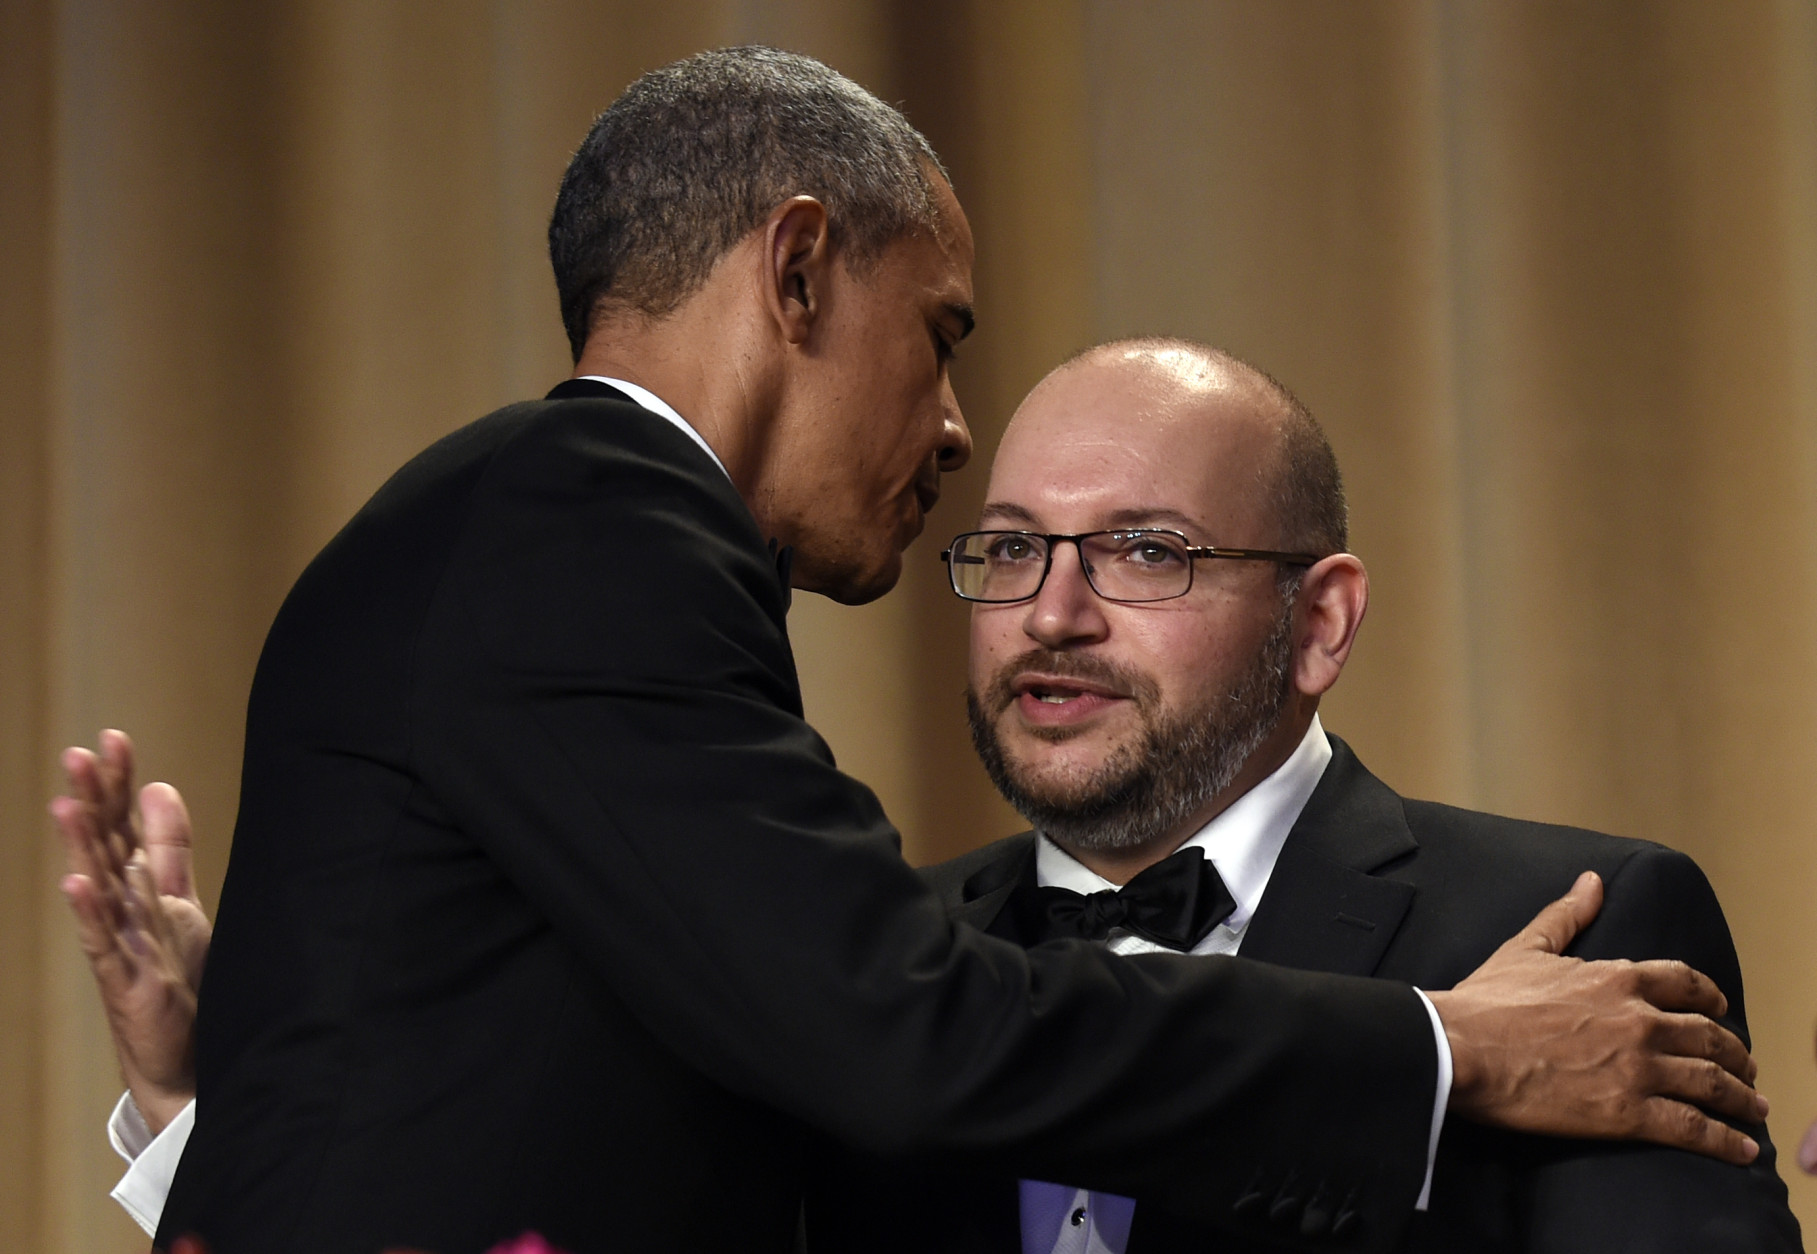 President Barack Obama, left, hugs Jason Rezaian, right, the Washington Post reporter freed after being detained for more than 18 months in Iran, during the annual White House Correspondents' Association dinner at the Washington Hilton in Washington, Saturday, April 30, 2016. (AP Photo/Susan Walsh)